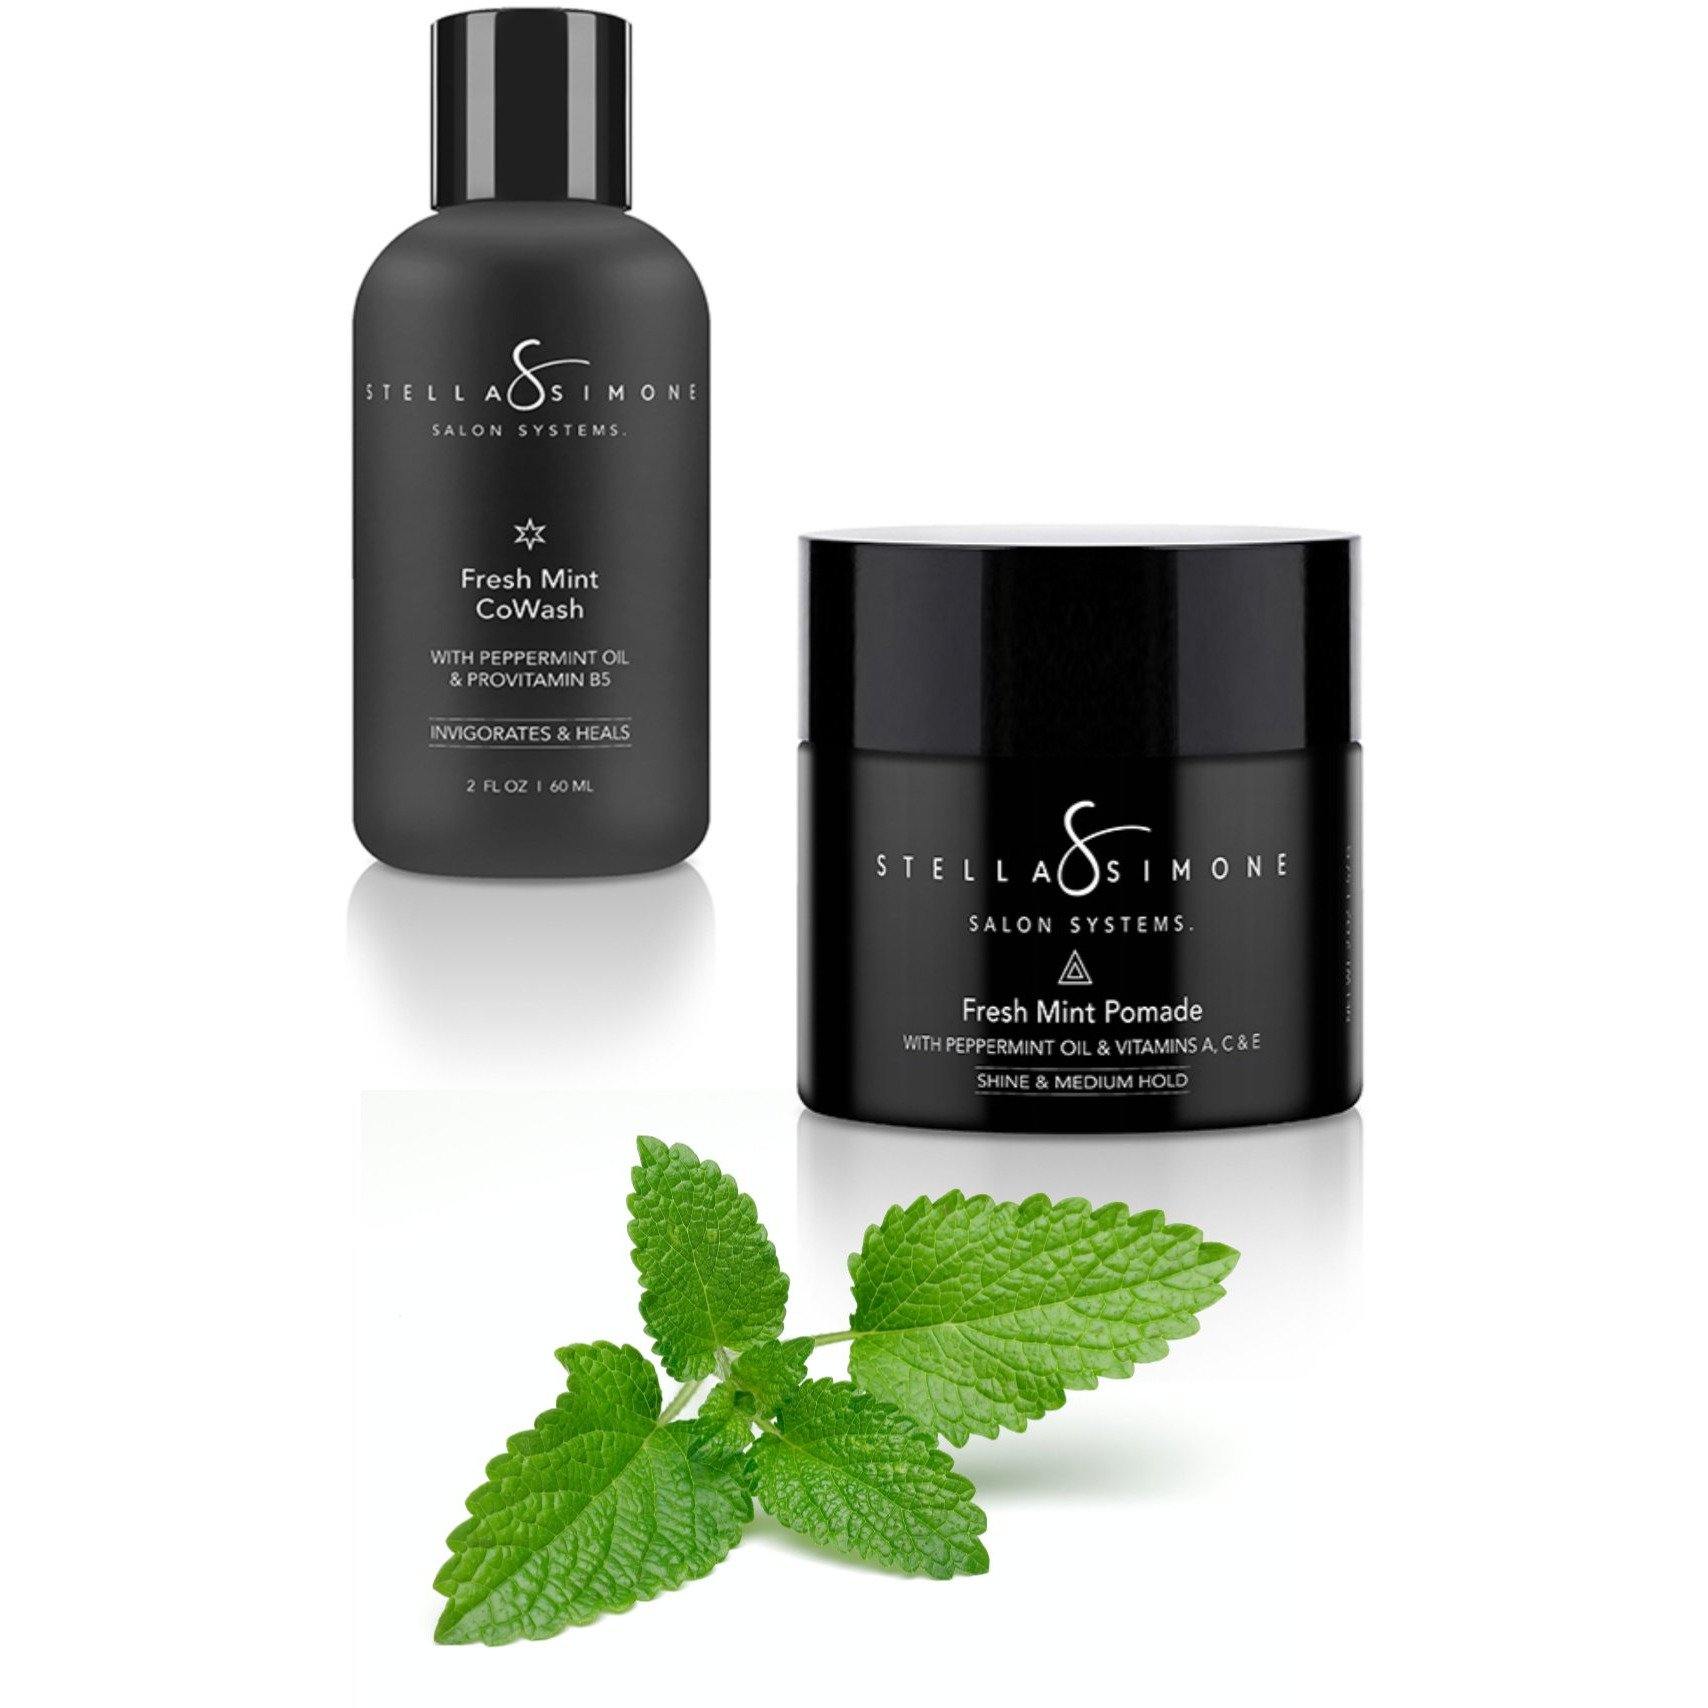 Going All Natural | Chemical Free Hair | Peppermint + Green Tea + Botanical Extracts | 4 PC | Haircare Kit | No Added Gluten | StellaSimone Salon Systems.